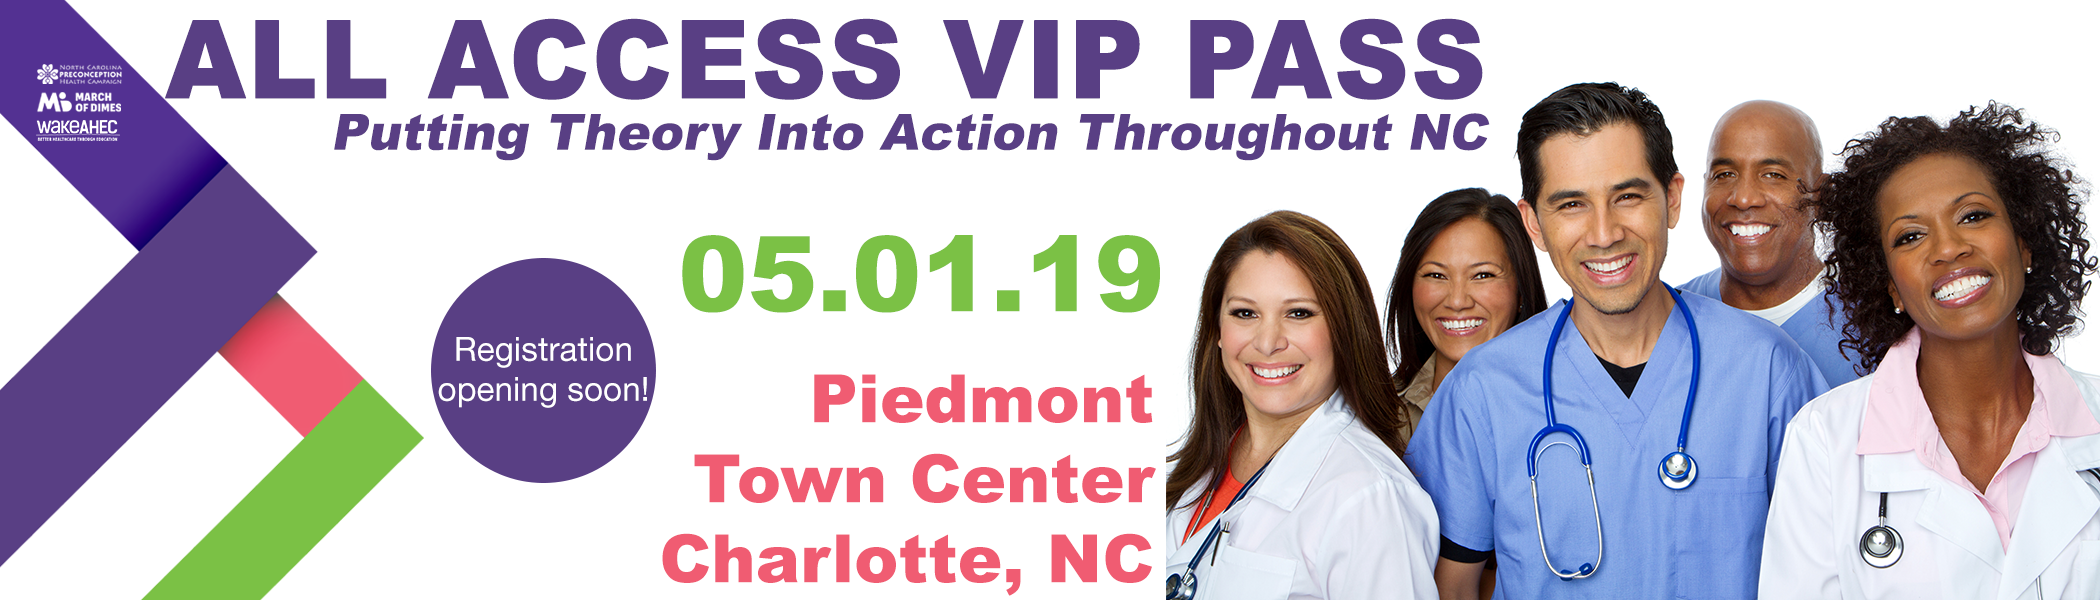 All Access VIP Pass: Putting Theory Into Action Throughout NC